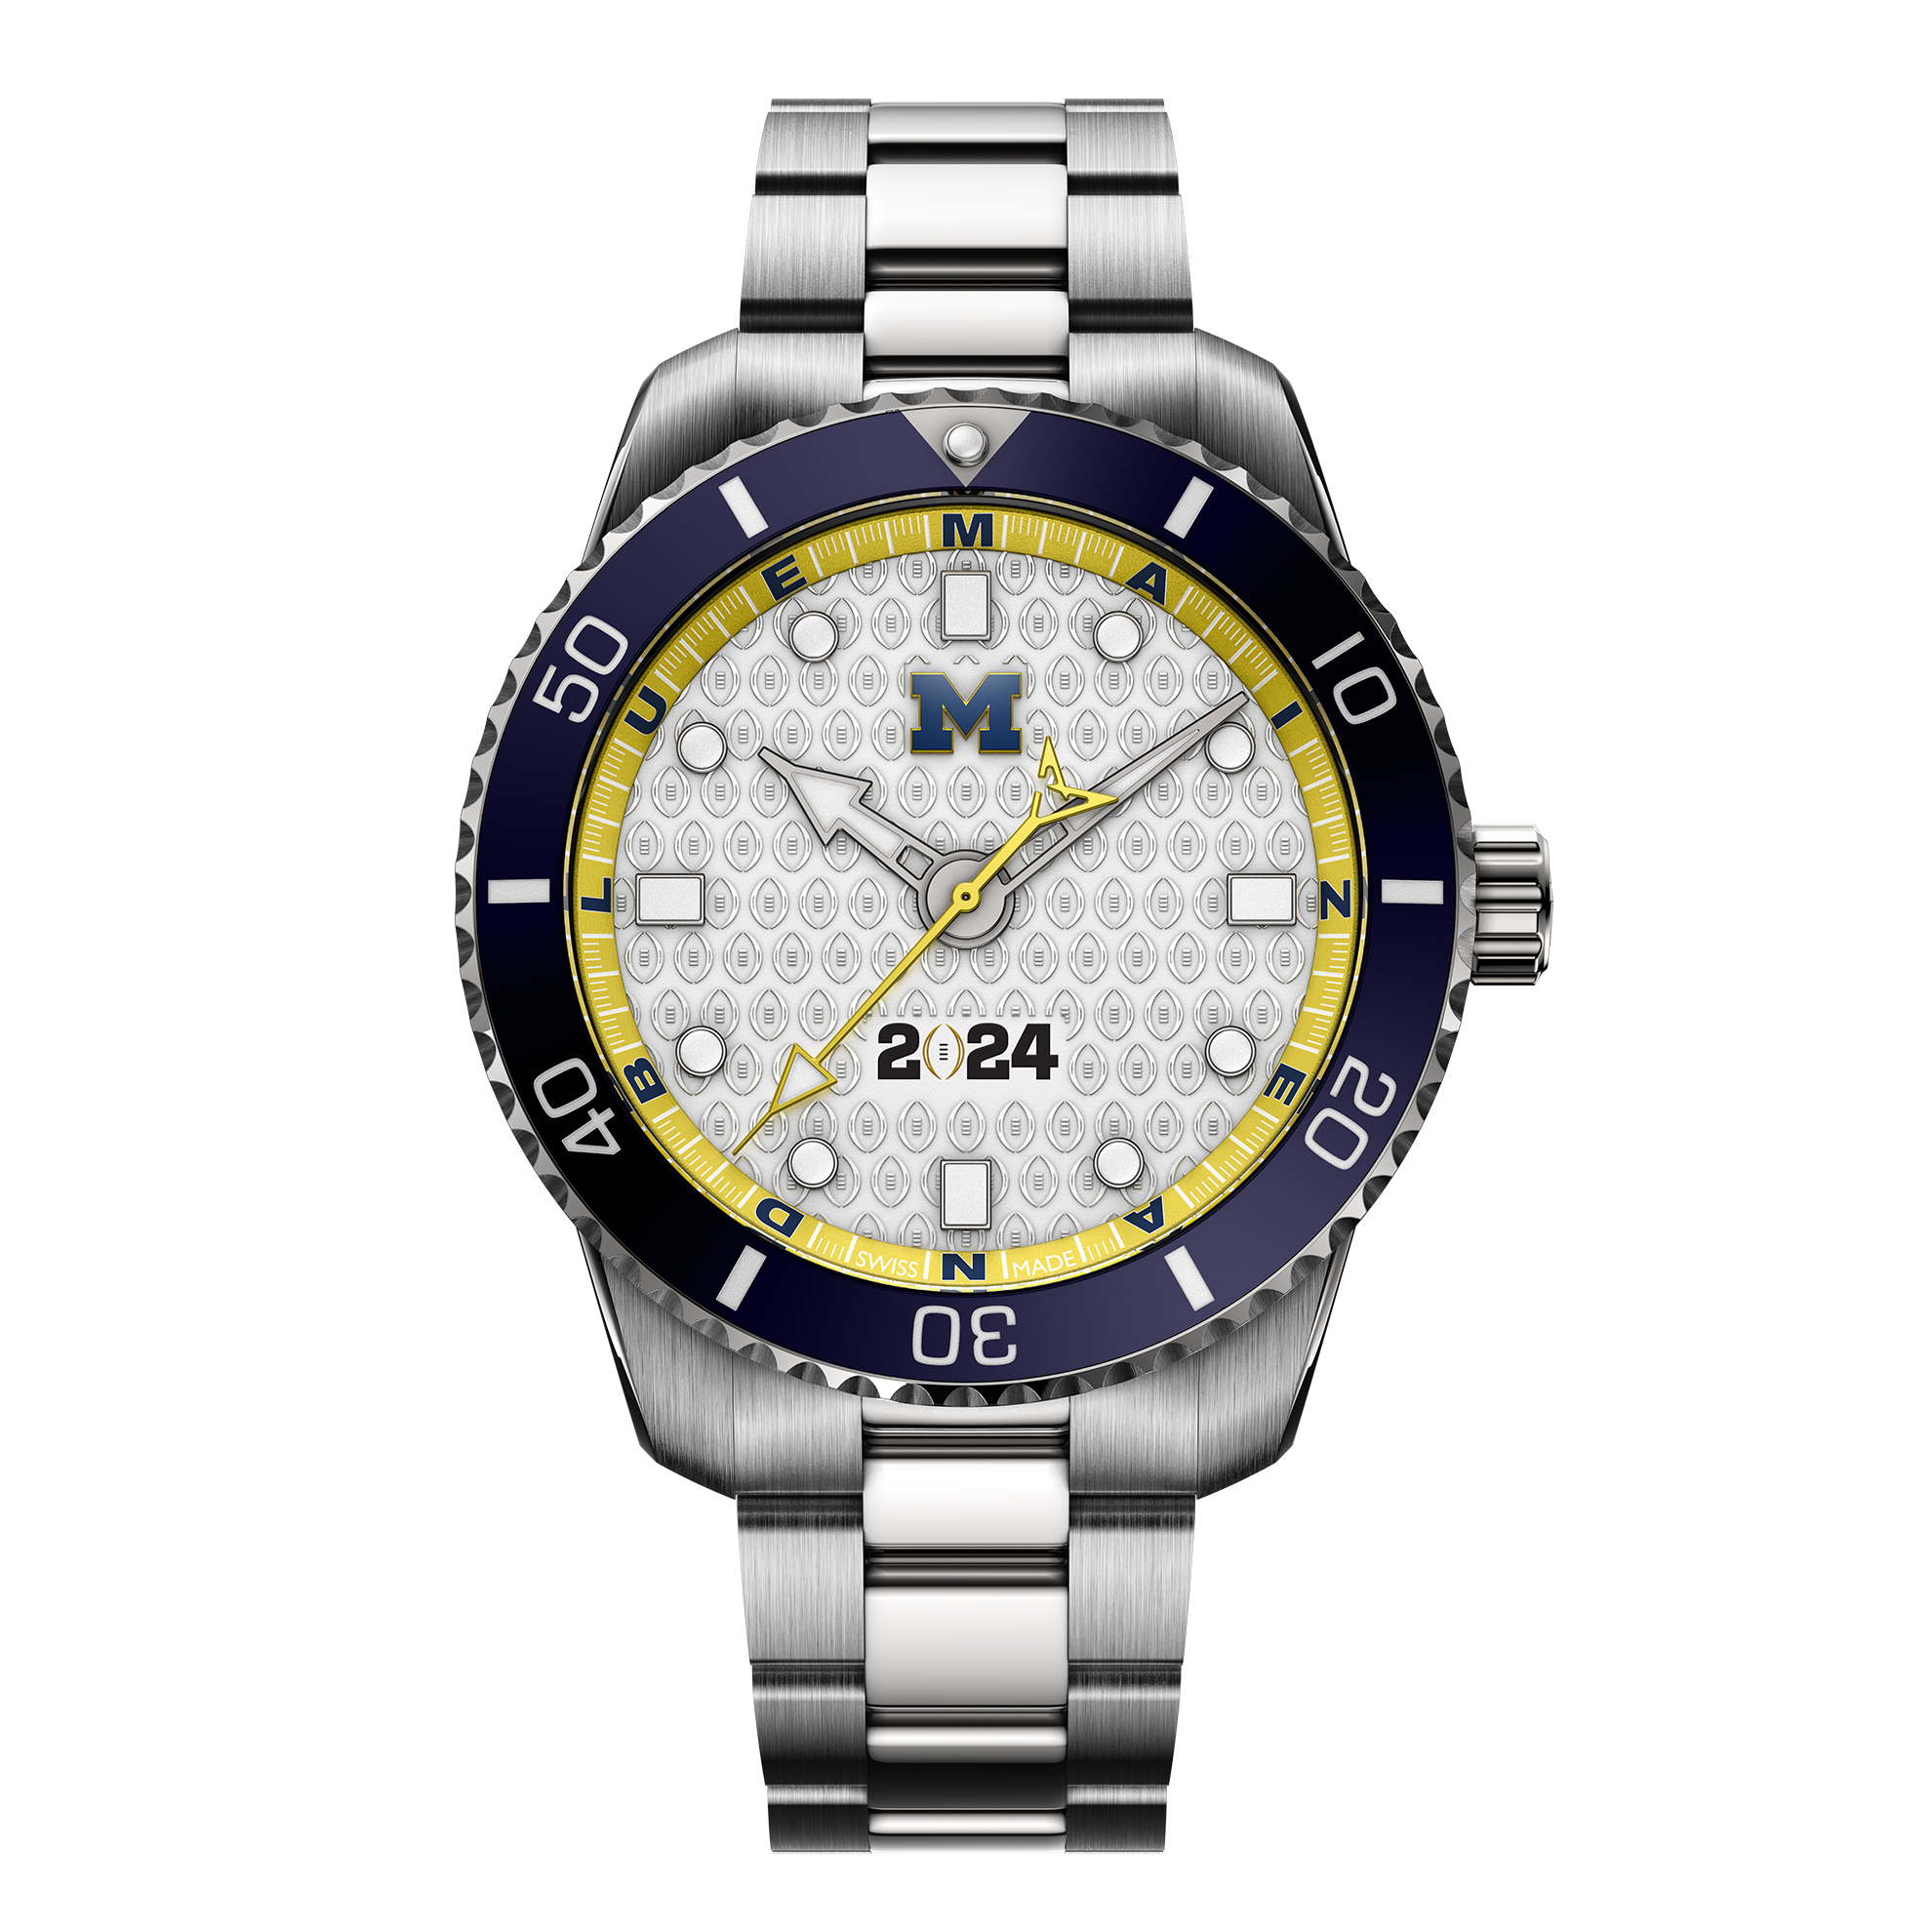 Michigan Wolverines 2024 CFP College Football Playoffs swiss made automatic watch